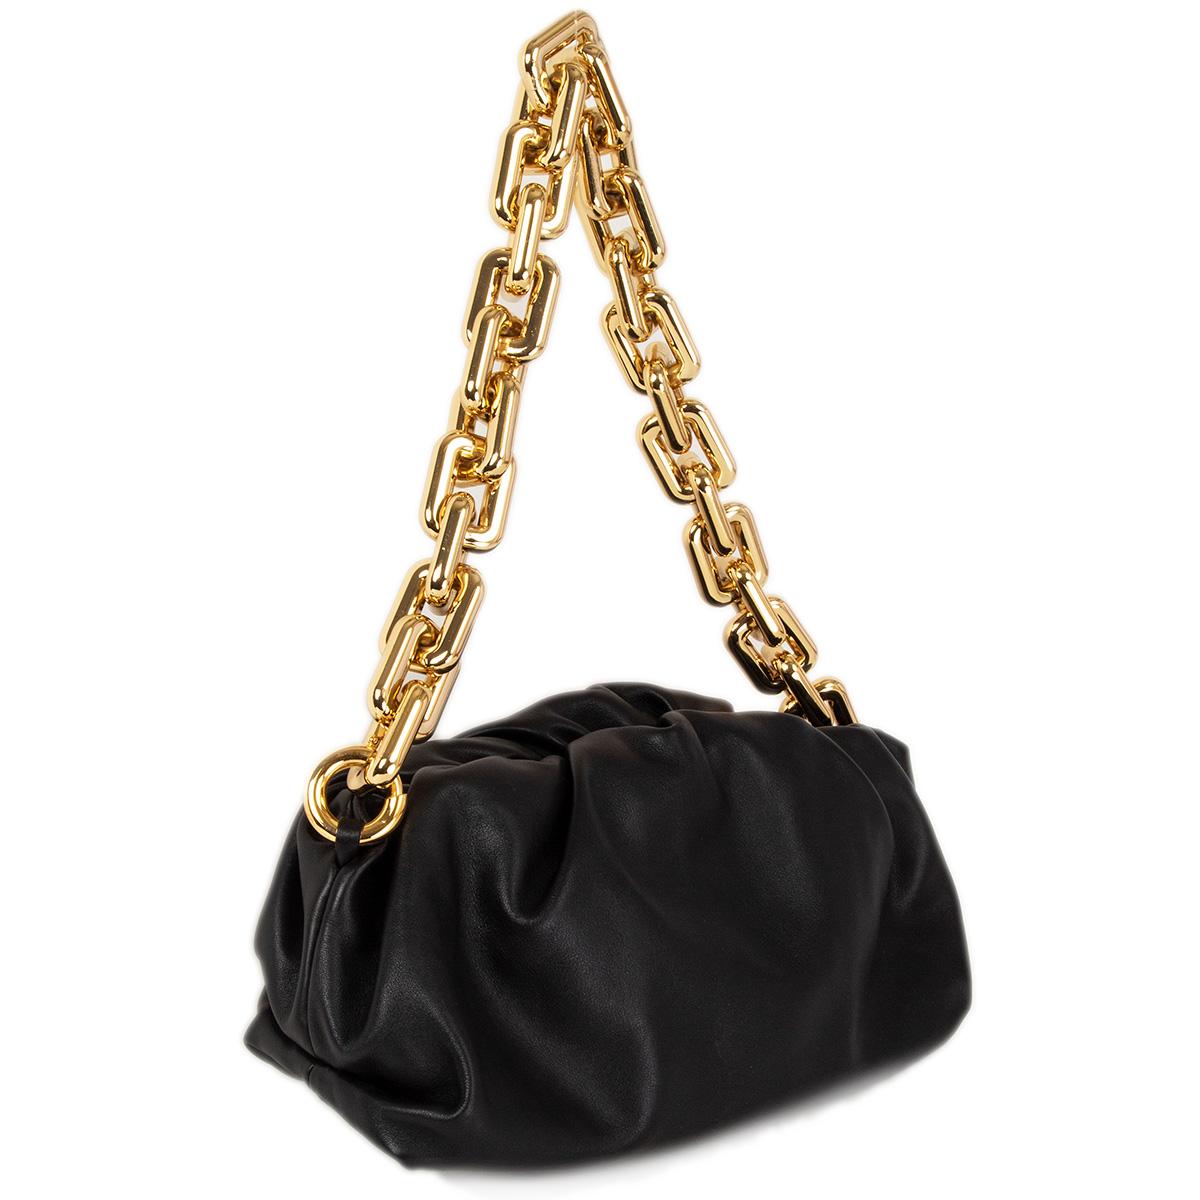 100% authentic Bottega Veneta Chain Pouch bag in supple black calfskin leather with a chunky golden chain handle. Opens with a magnetic-tab fastening and is lined in black leather. Has been carried once or twice and is in excellent condition.